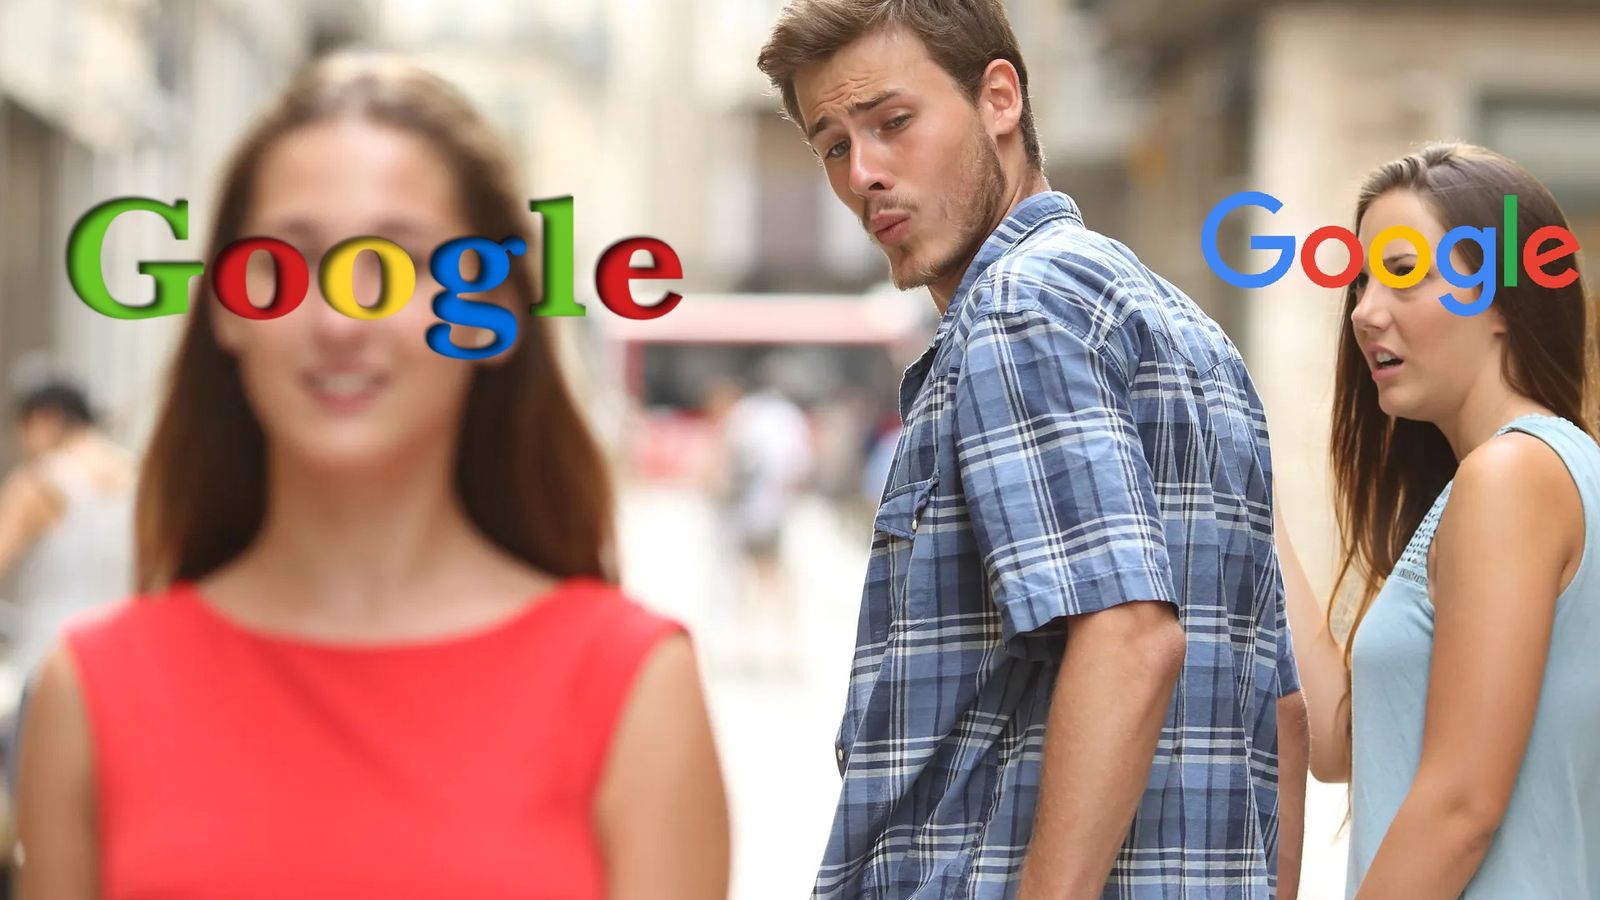 Distracted boyfriend looking at old Google logo on woman as girlfriend with new Google logo looks disgusted